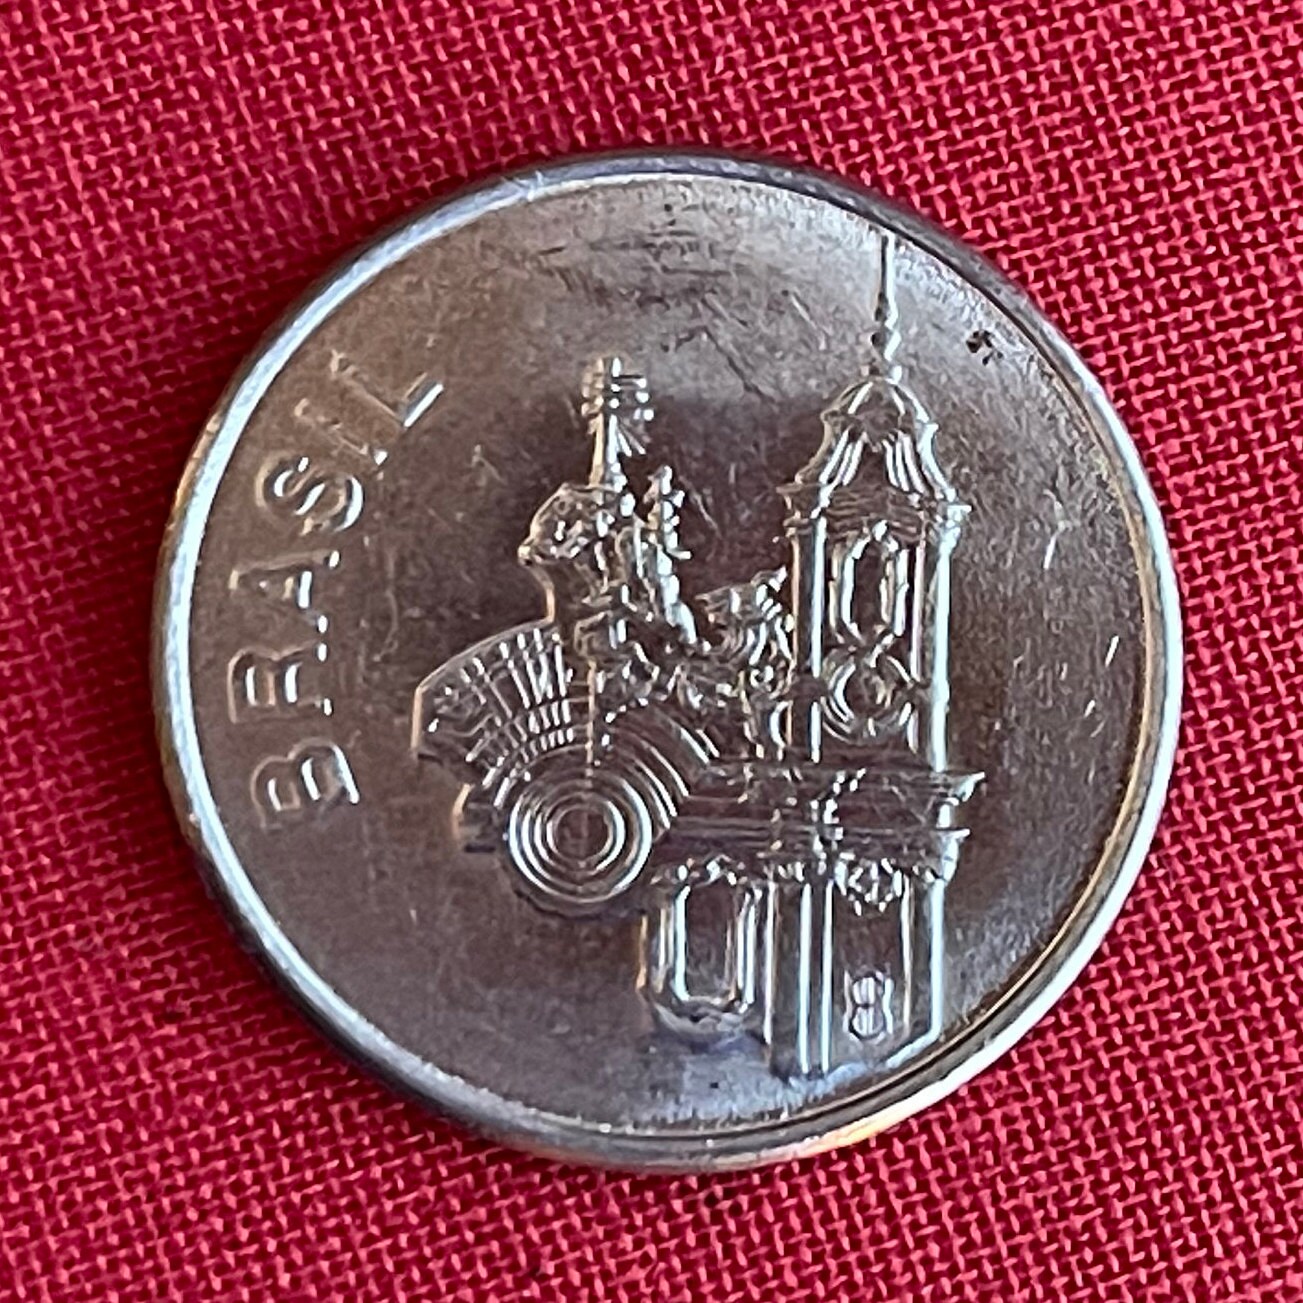 Church of Saint Francis 20 Cruzieros Brazil Authentic Coin Money for Jewelry and Craft Making (Francis of Assisi) (Aleijadinho)